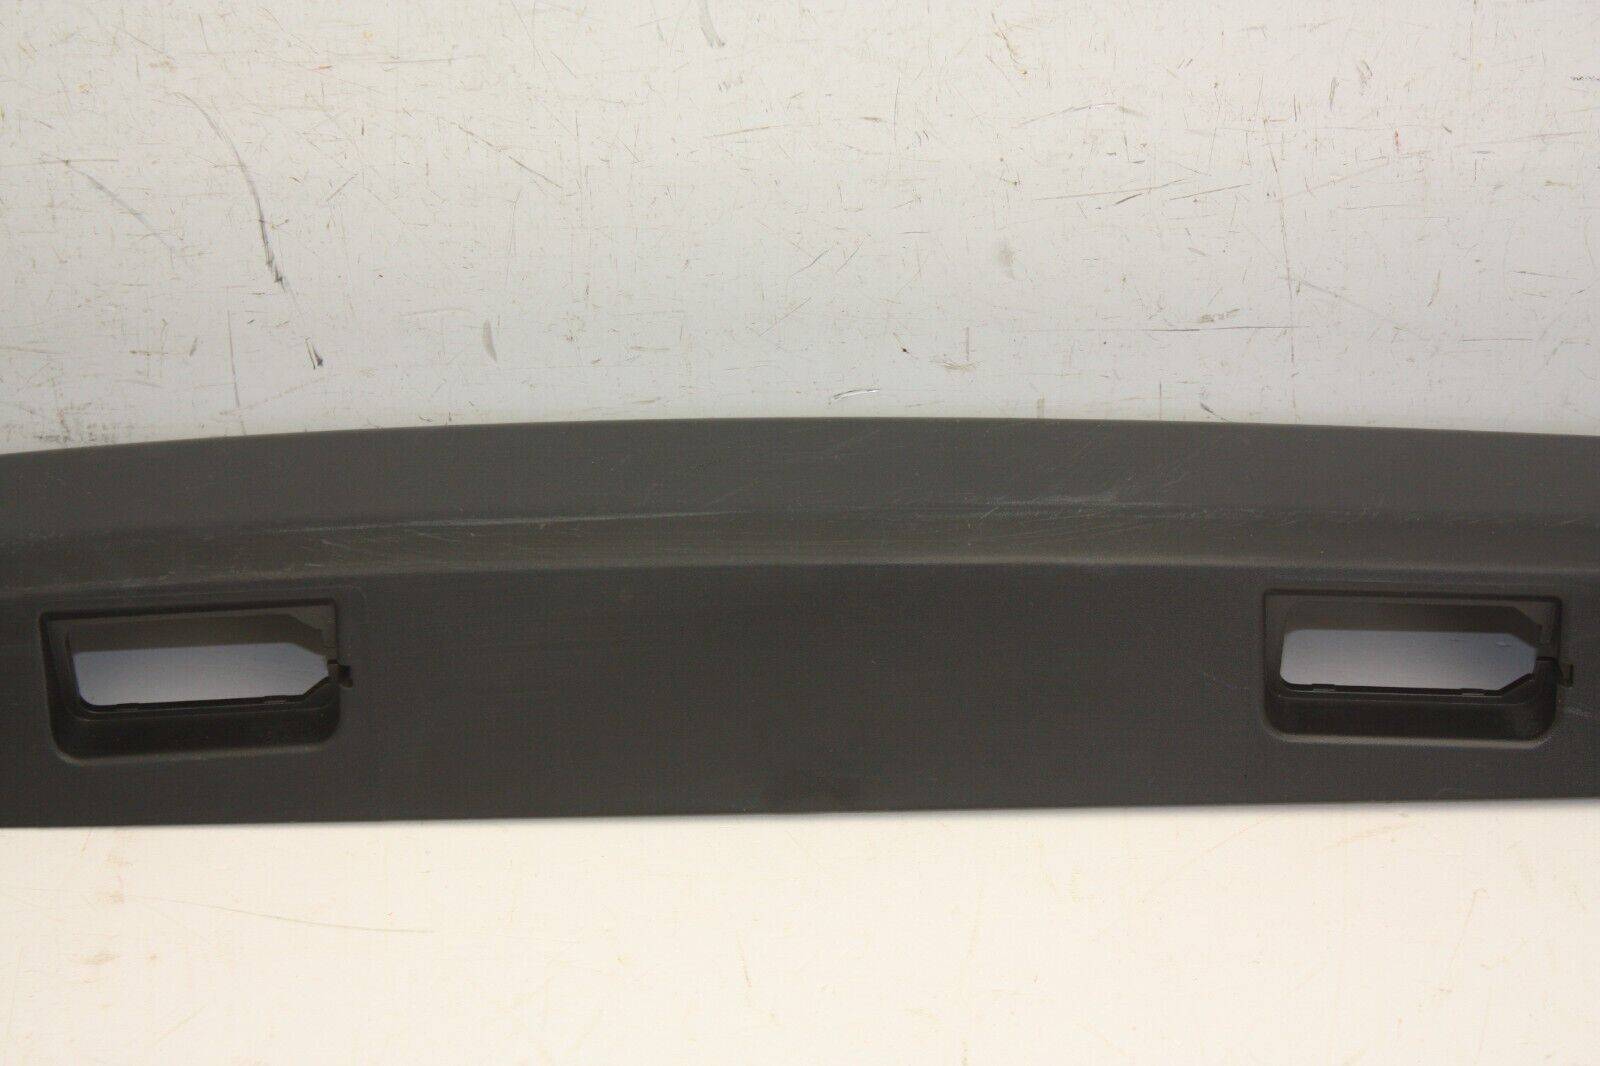 Ford-Transit-Custom-Tailgate-Lid-Cover-Recording-Bar-2018-ON-BK21-13555-AFW-176302846649-11